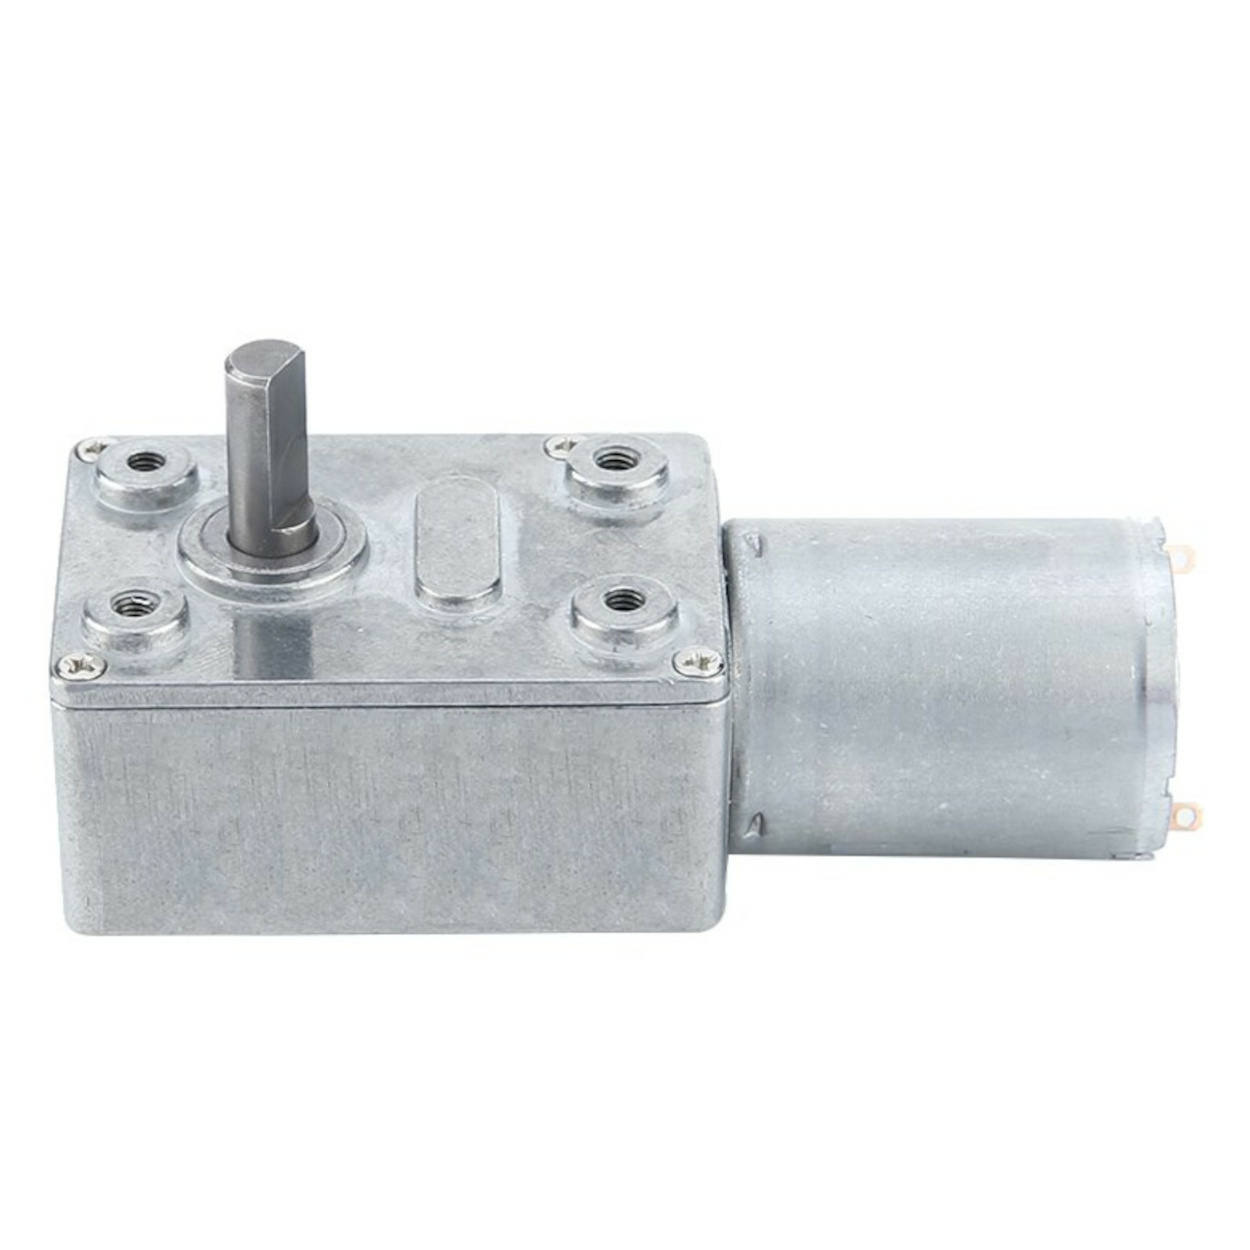 DC 12V 500RPM N20 High Torque Speed Reduction Motor with Metal Gearbox (4x)